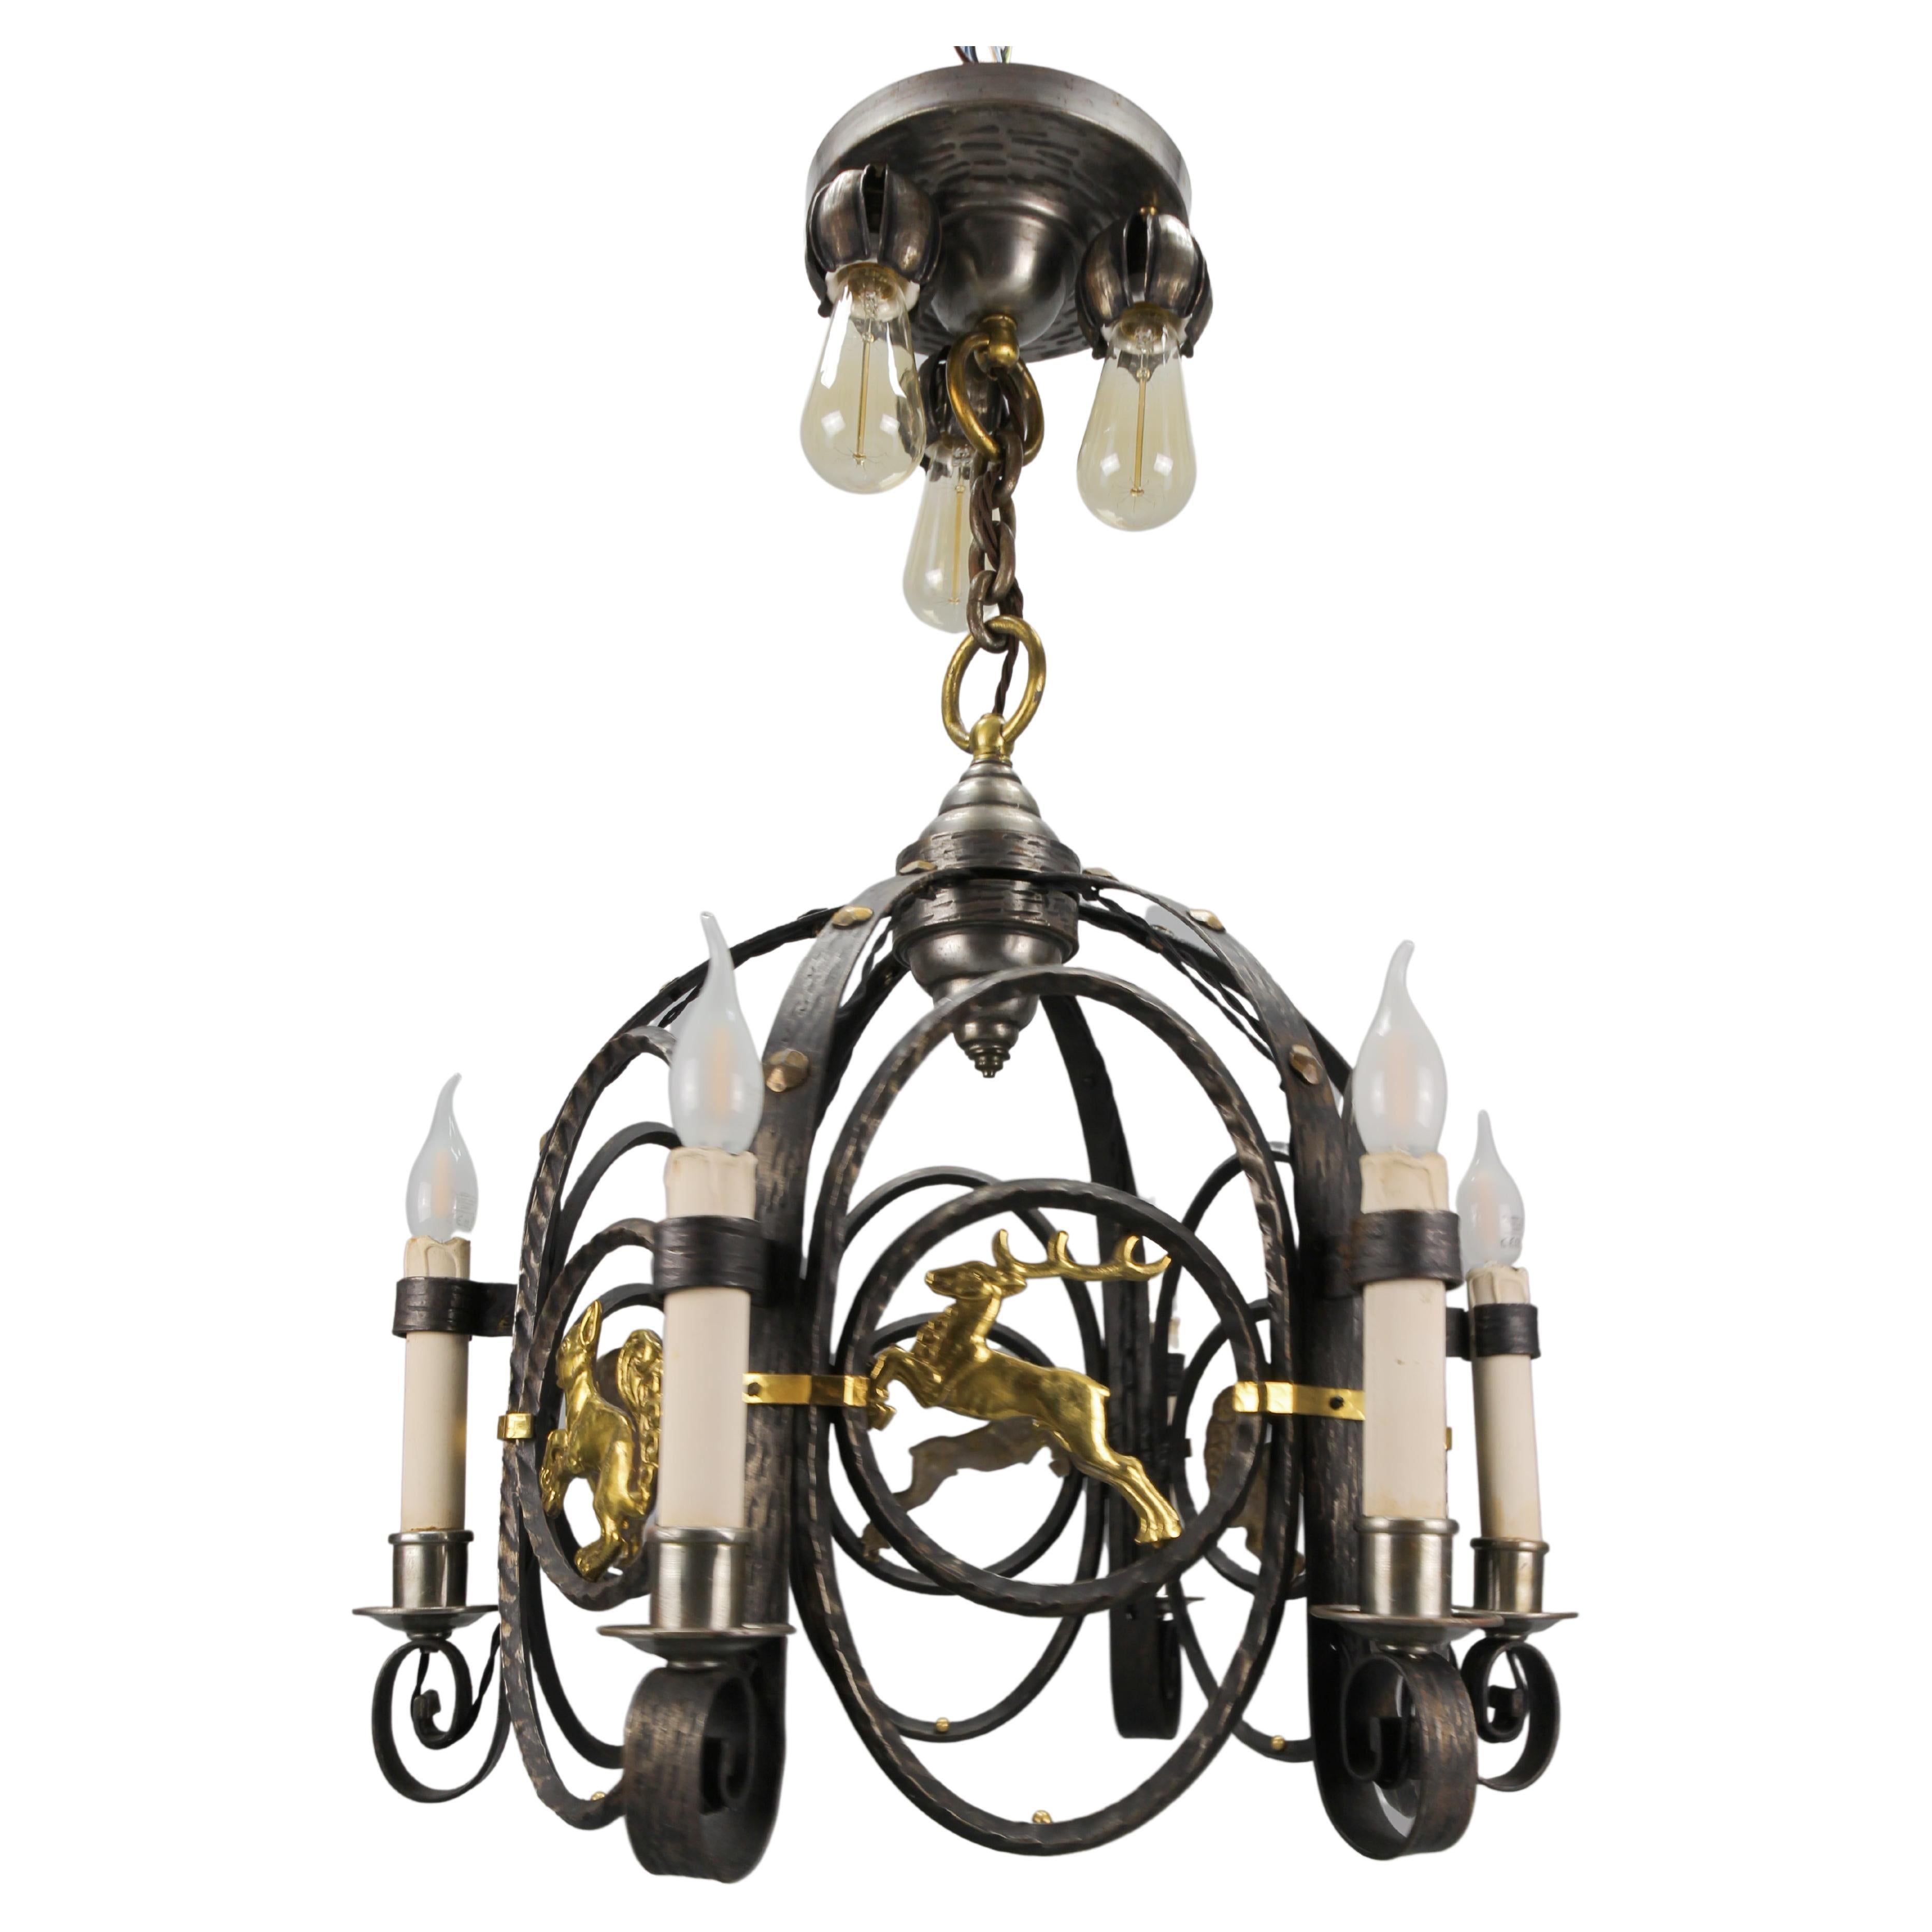 German Art Deco Nine-Light Wrought Iron and Brass Chandelier with Animals, 1920s For Sale